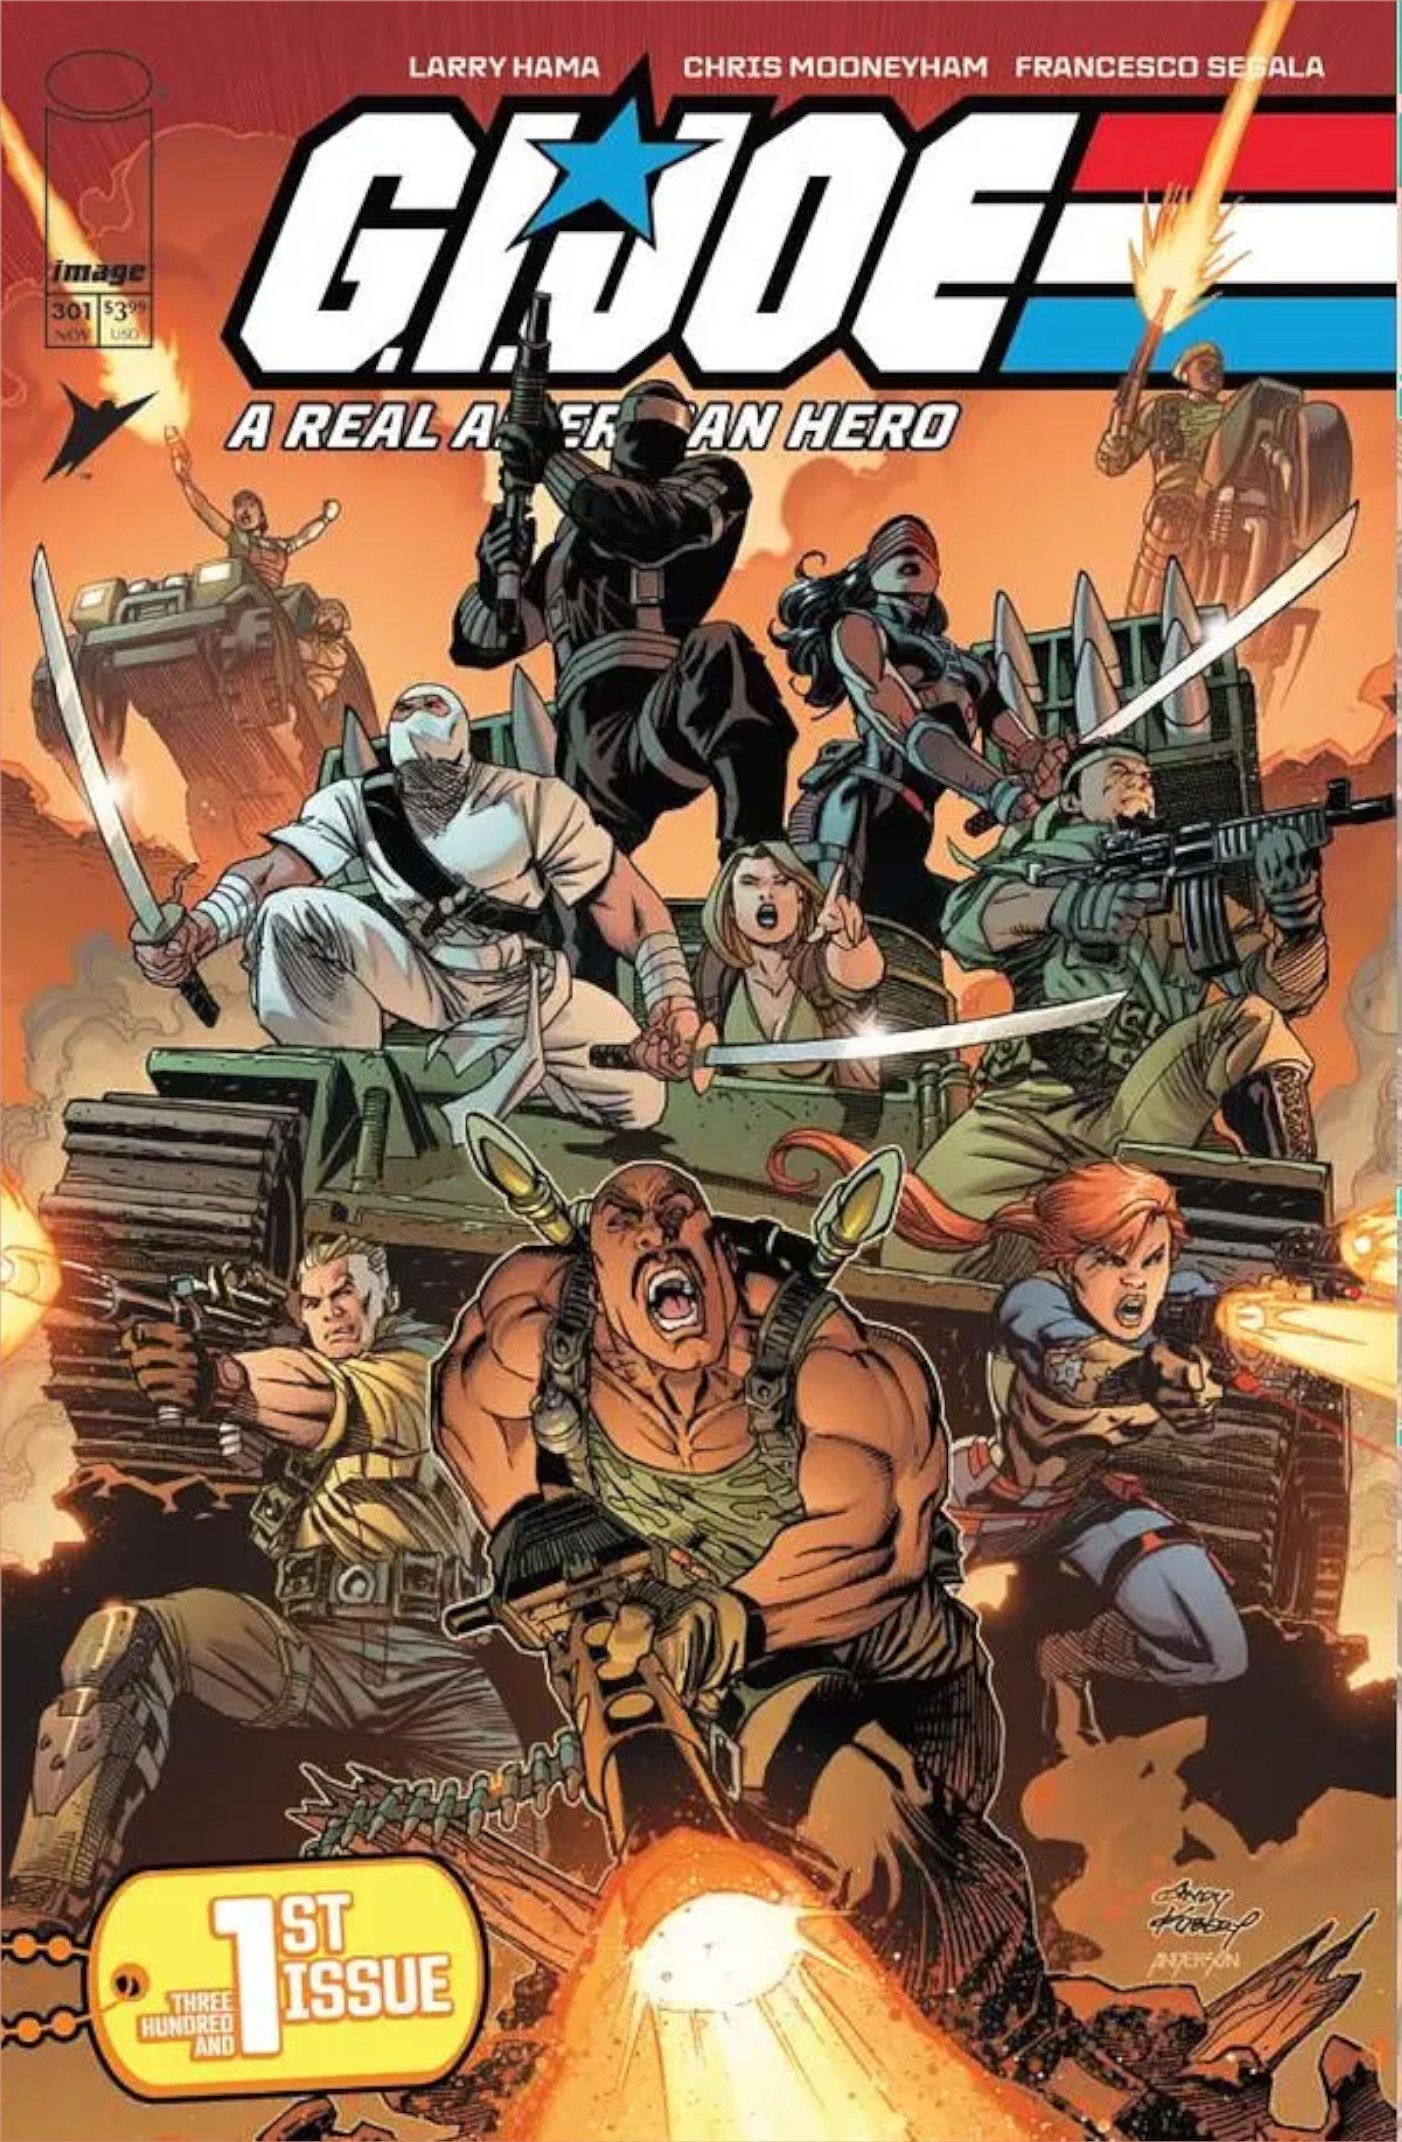 Snake Eyes Returns to G.I. Joe with 1 Controversial Change